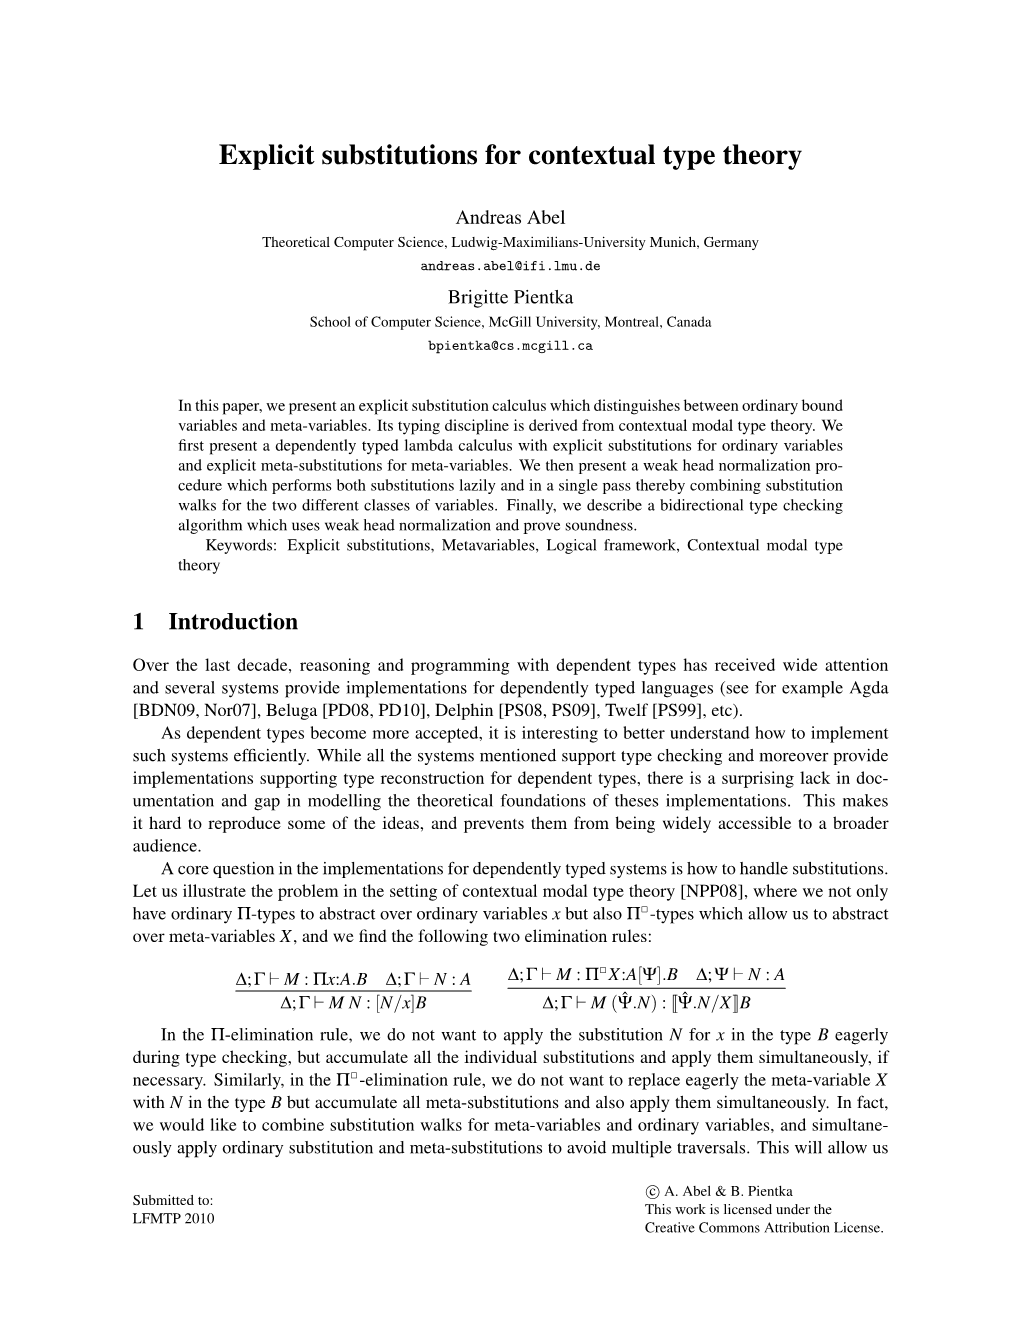 Explicit Substitutions for Contextual Type Theory